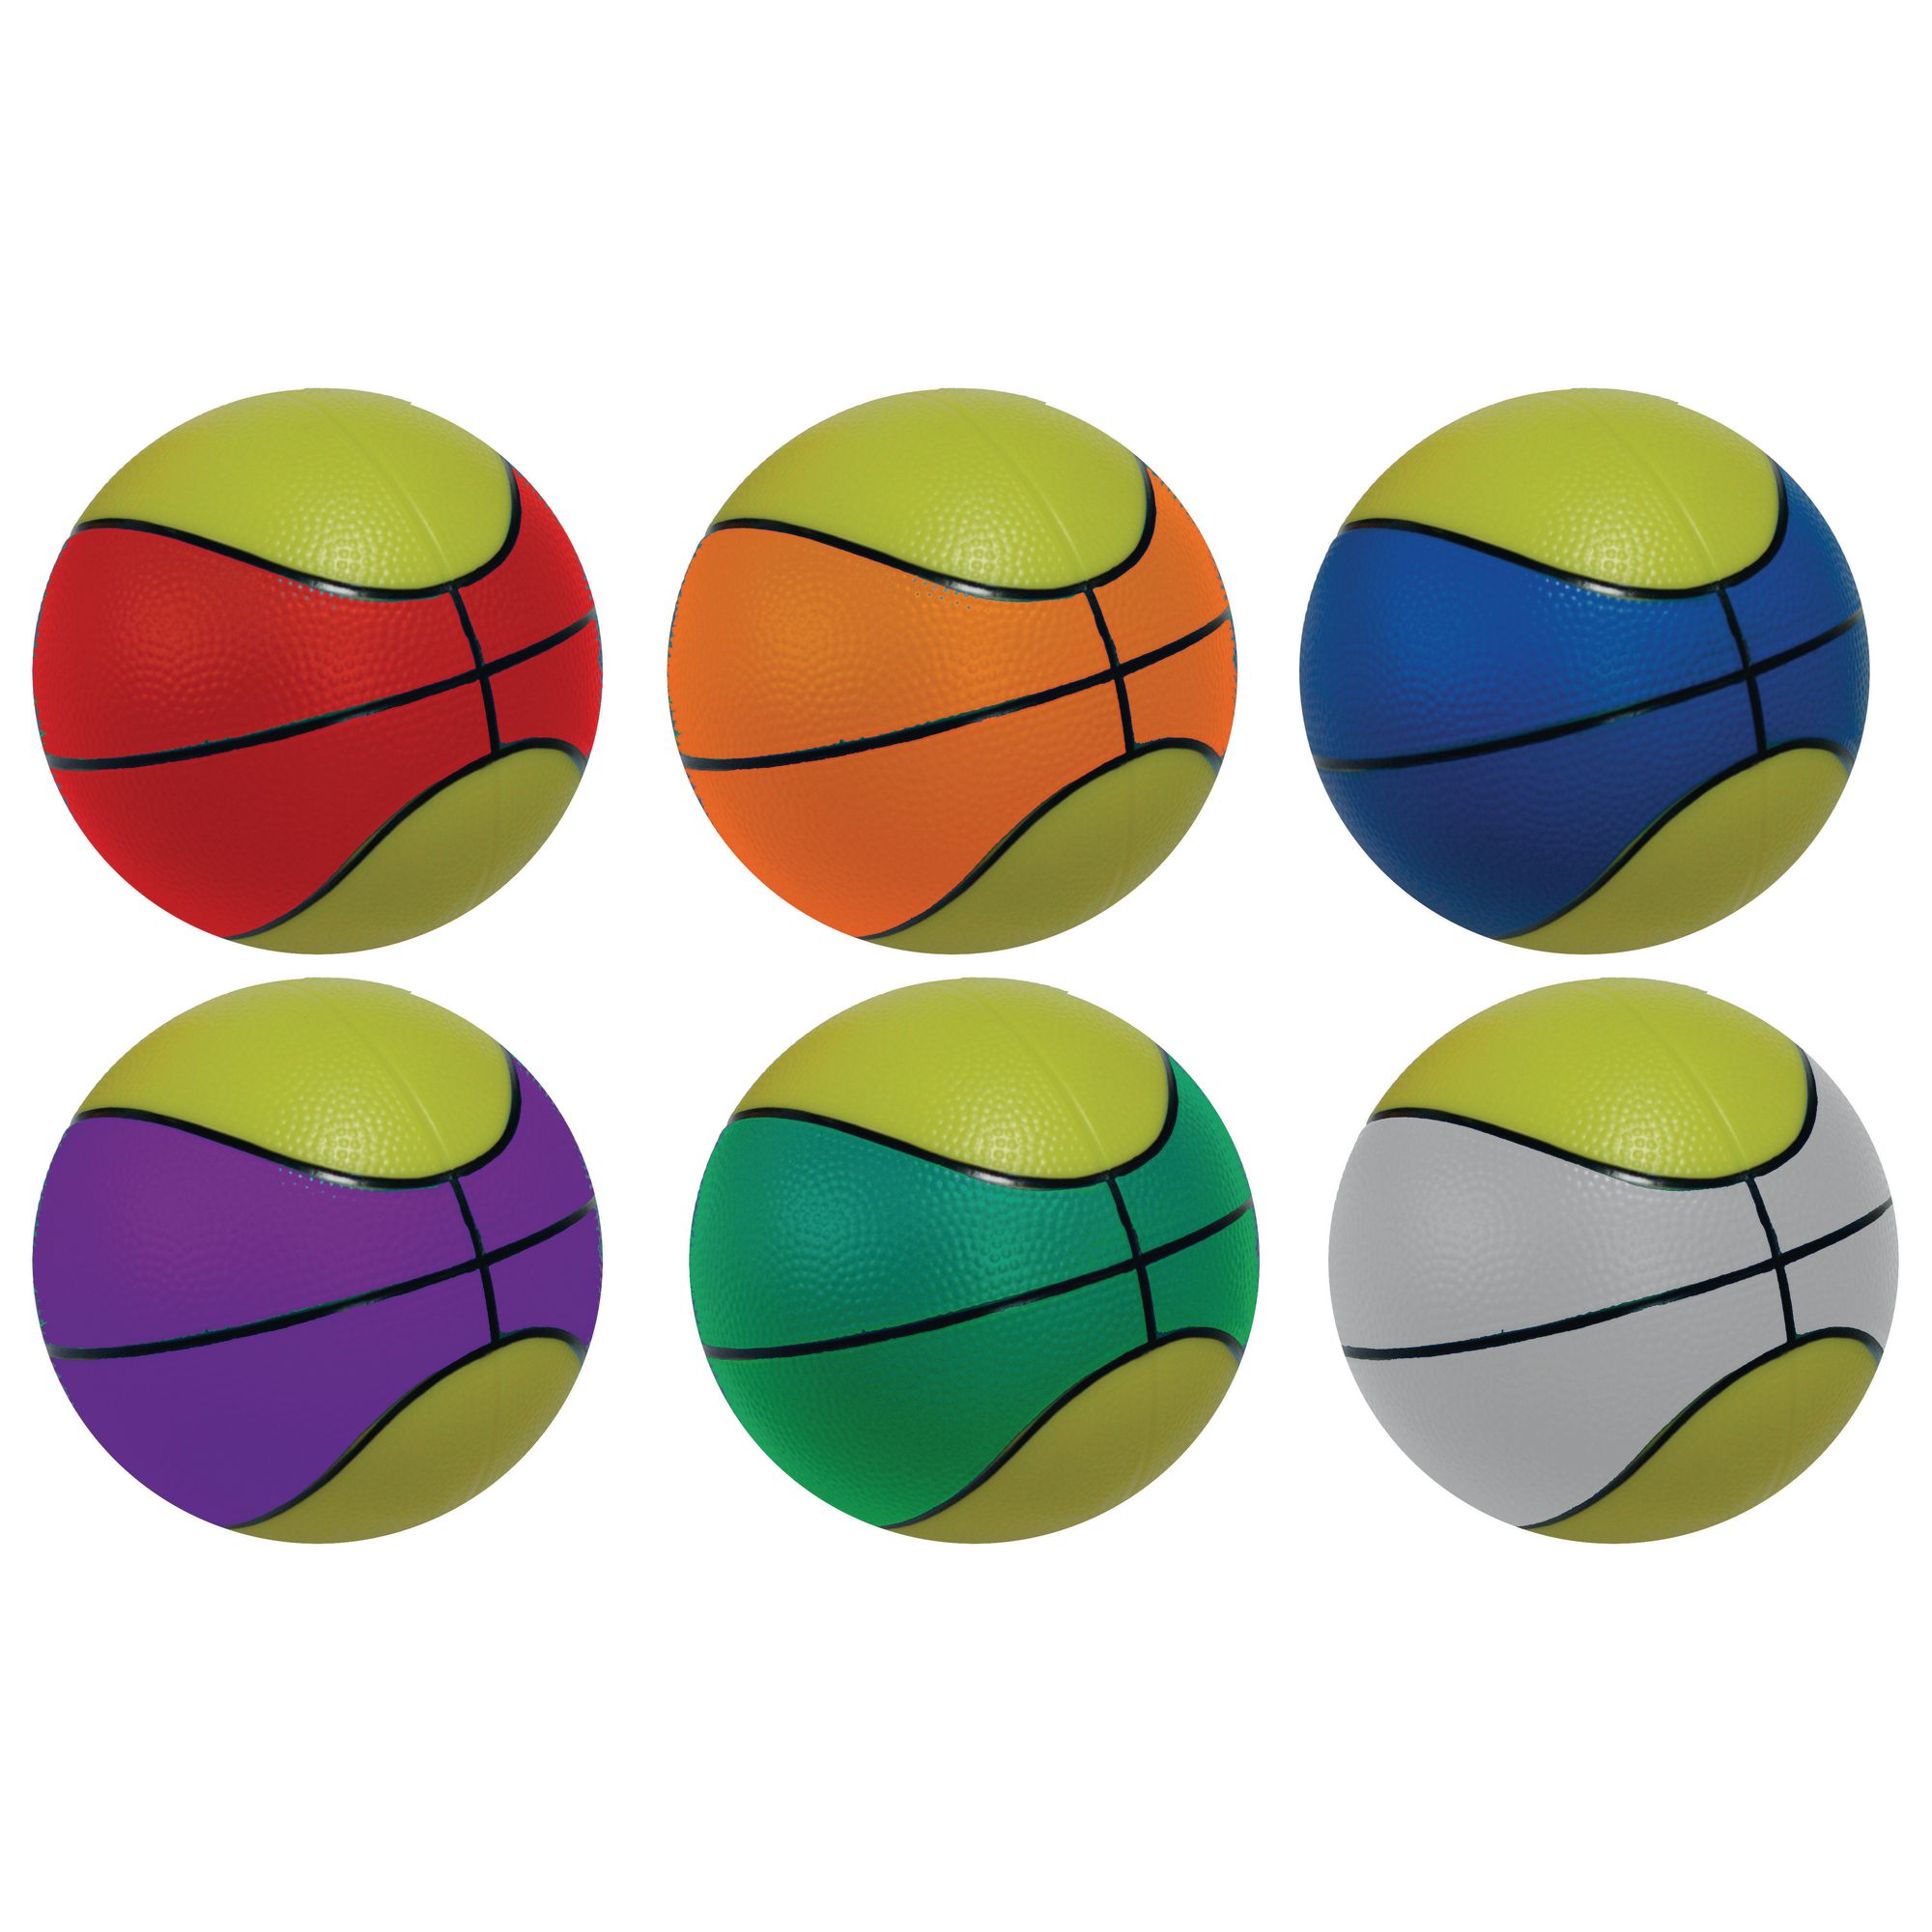 PPEP09400 - Retro Basketballs - Multi - Size 5 - Pack of 6 | Davies Sports